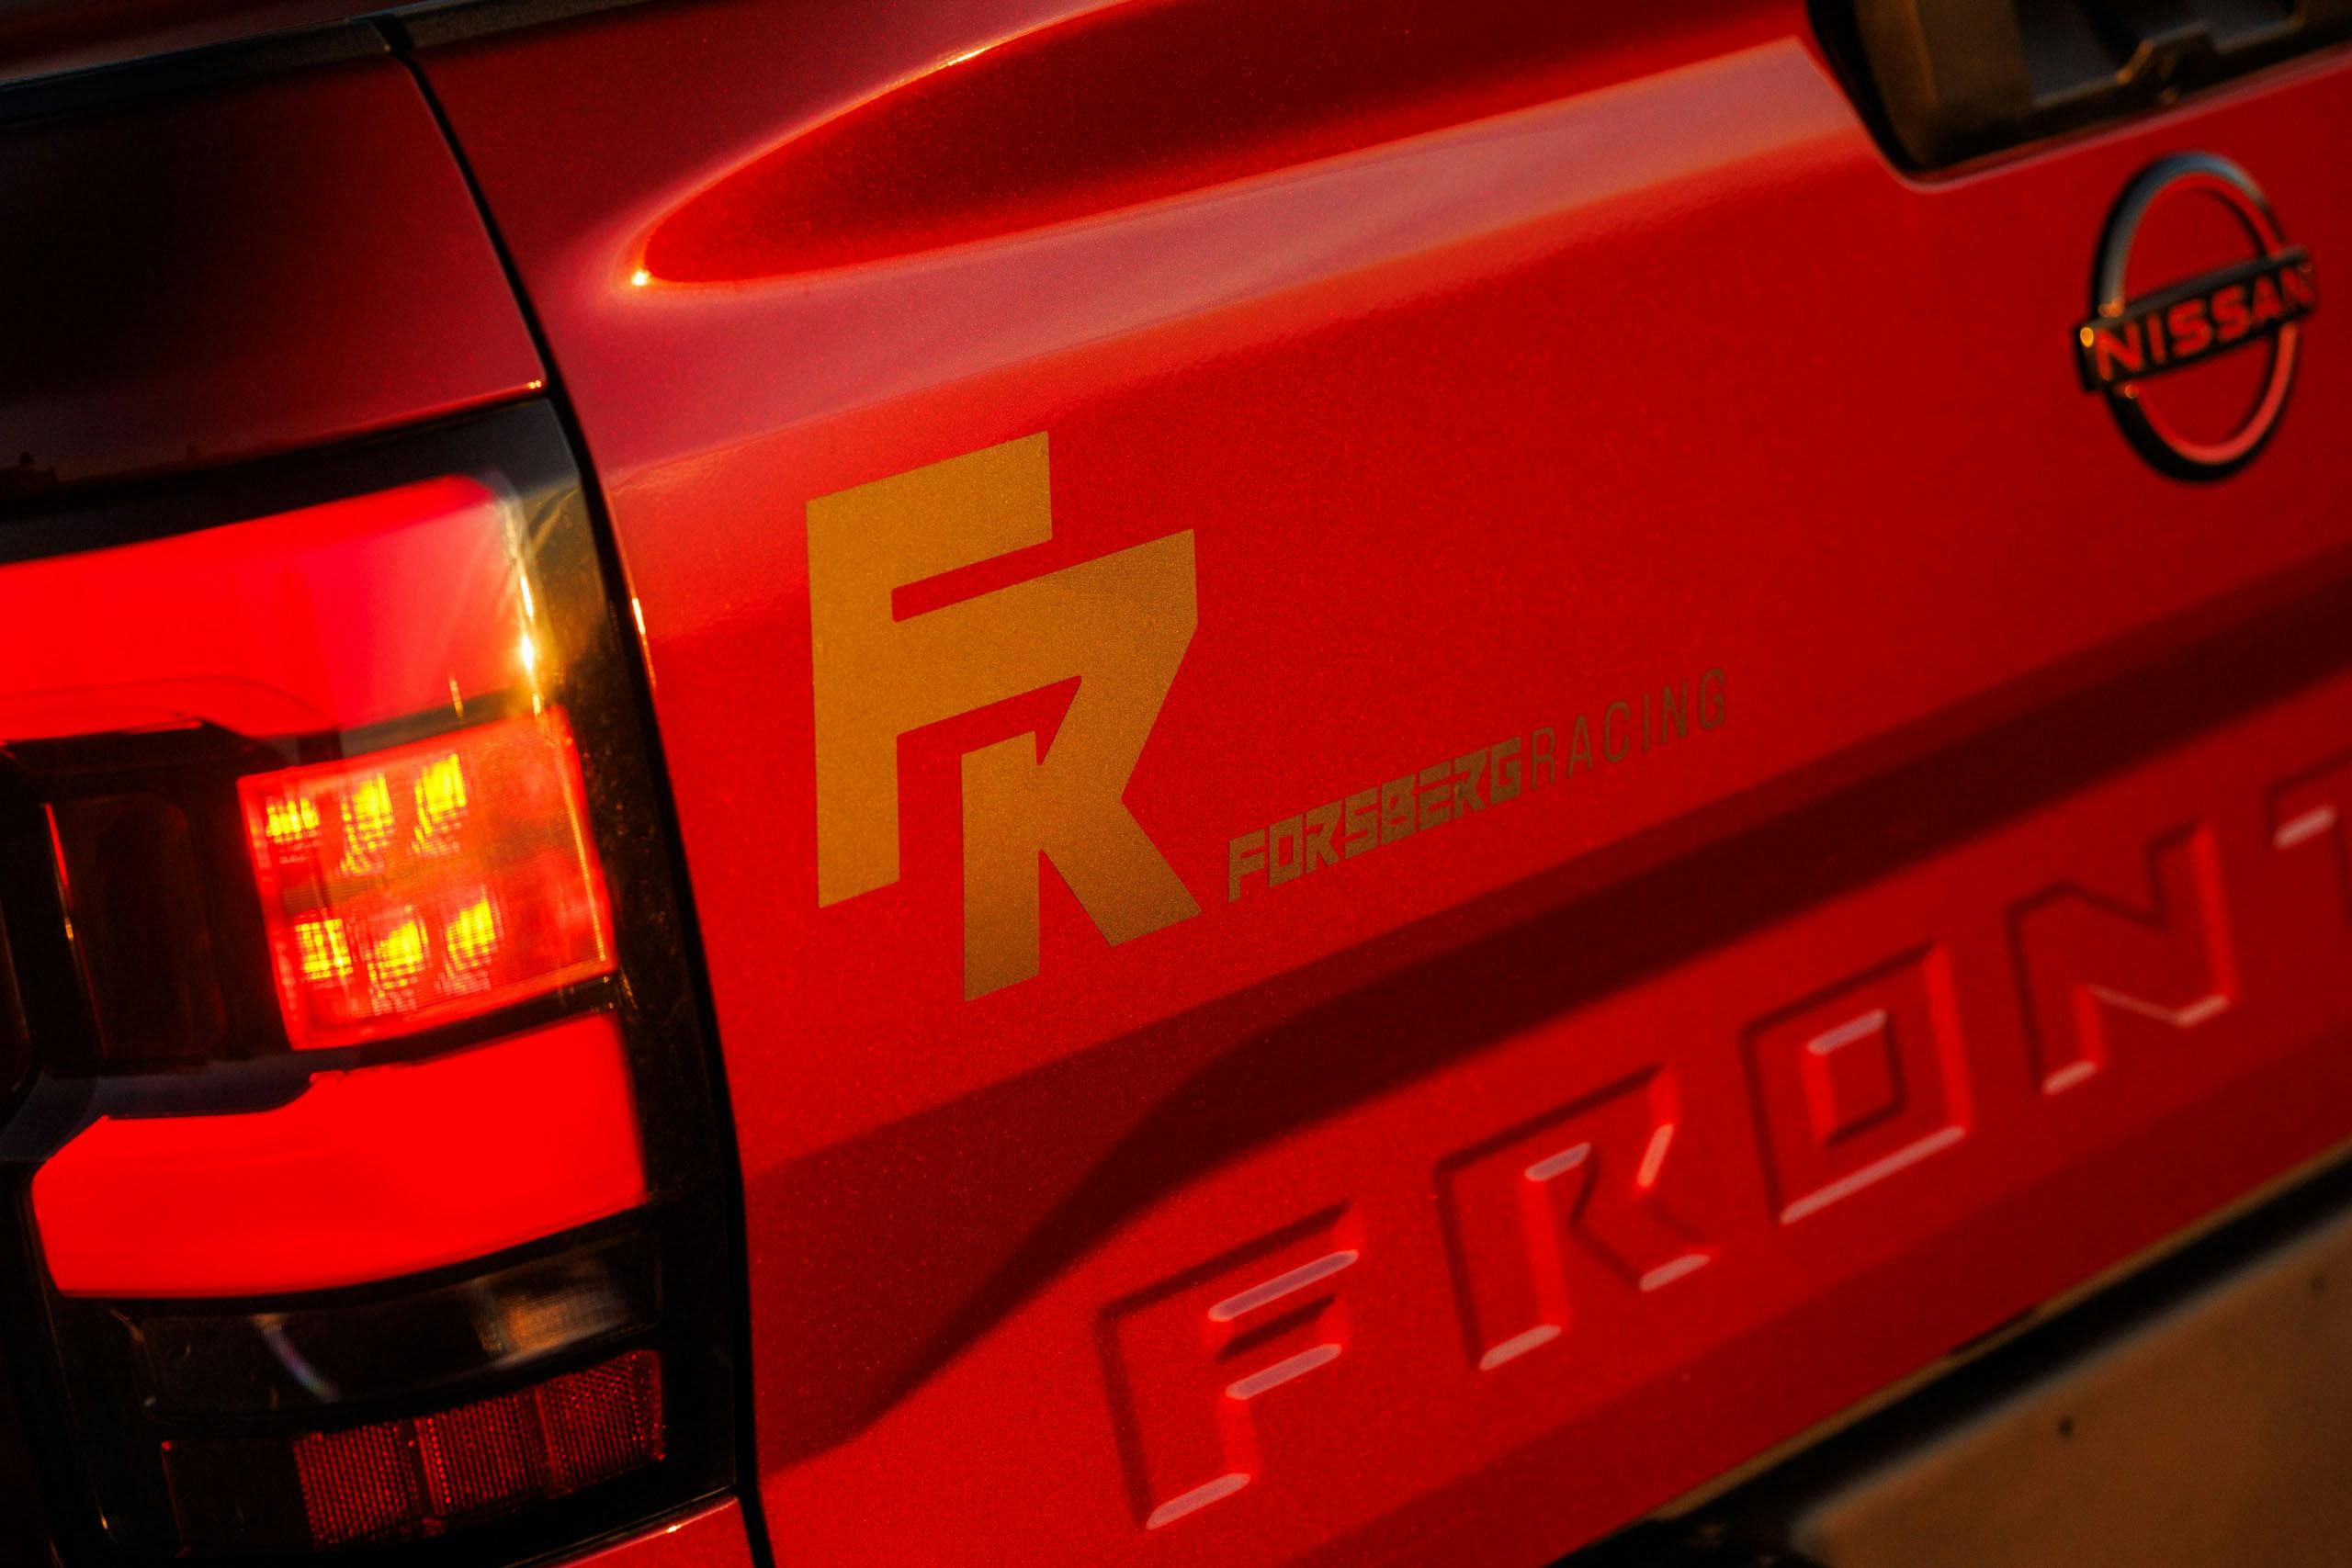 Nissan Frontier Forsberg Edition exterior tailgate decal detail